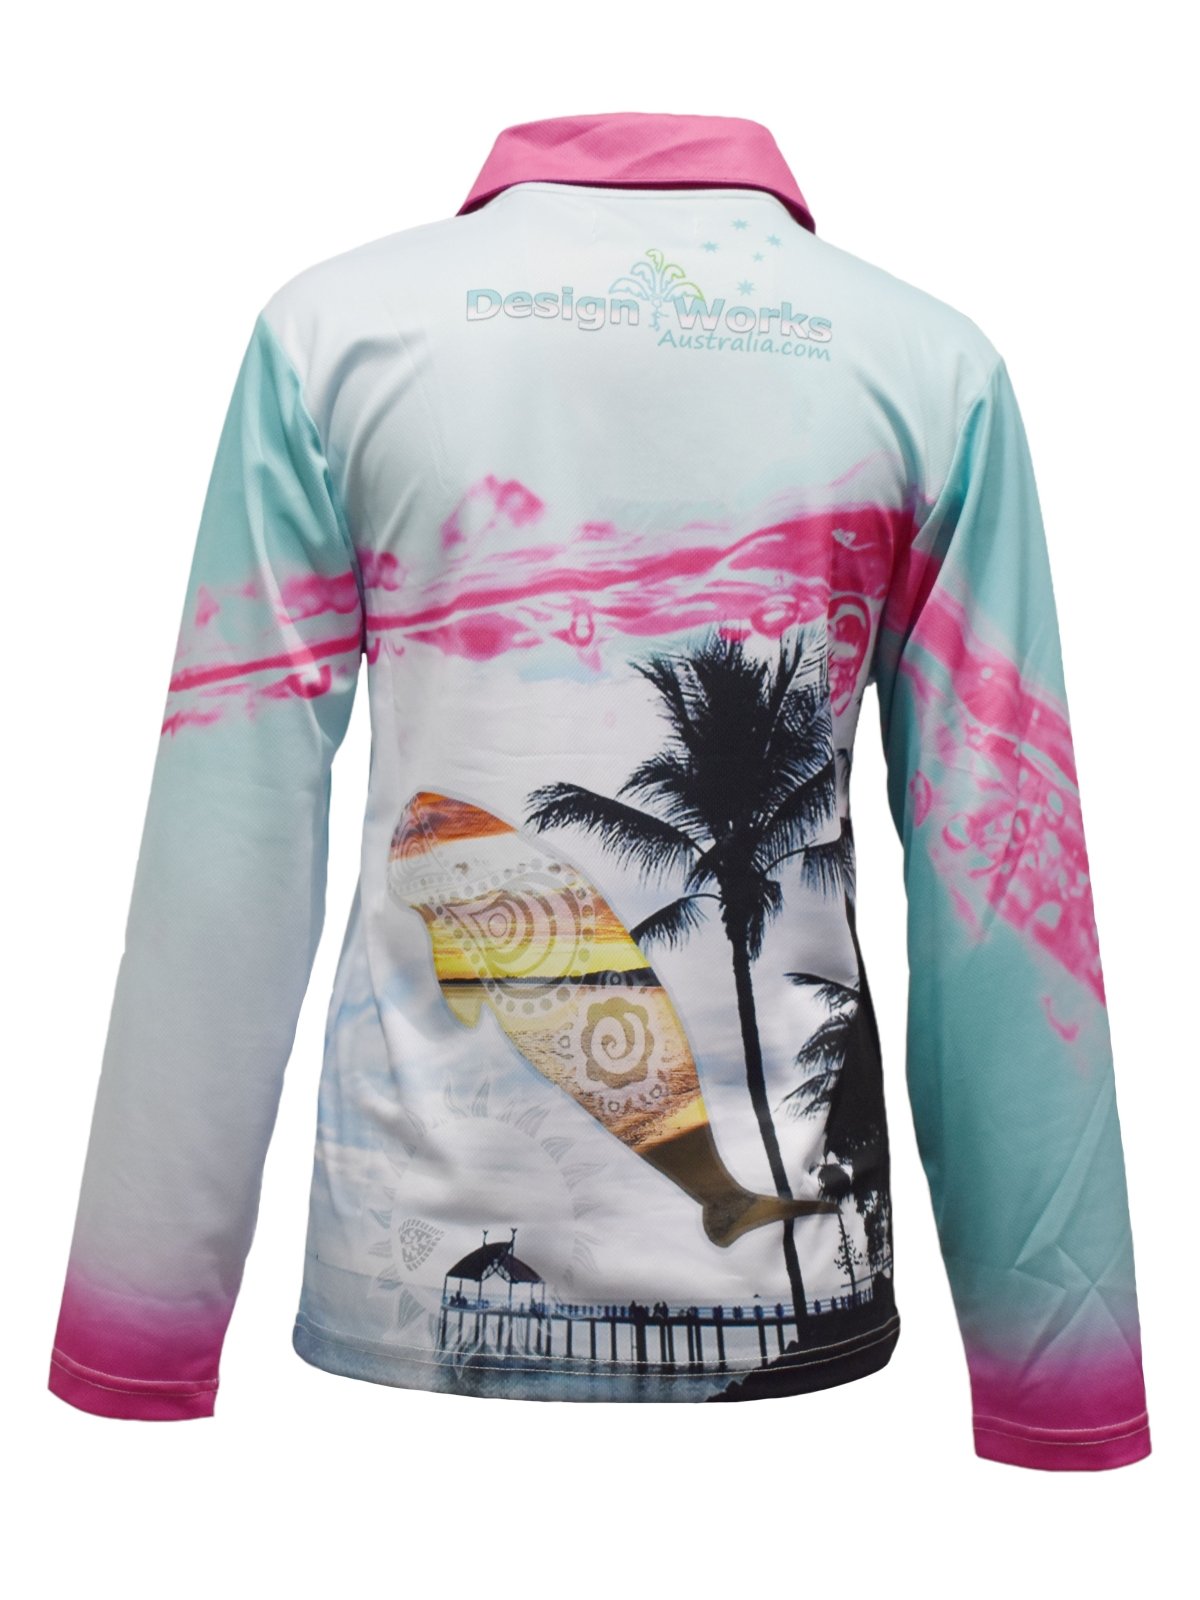 Adult L/S Fishing Shirt - Pink Jetty - Design Works Apparel